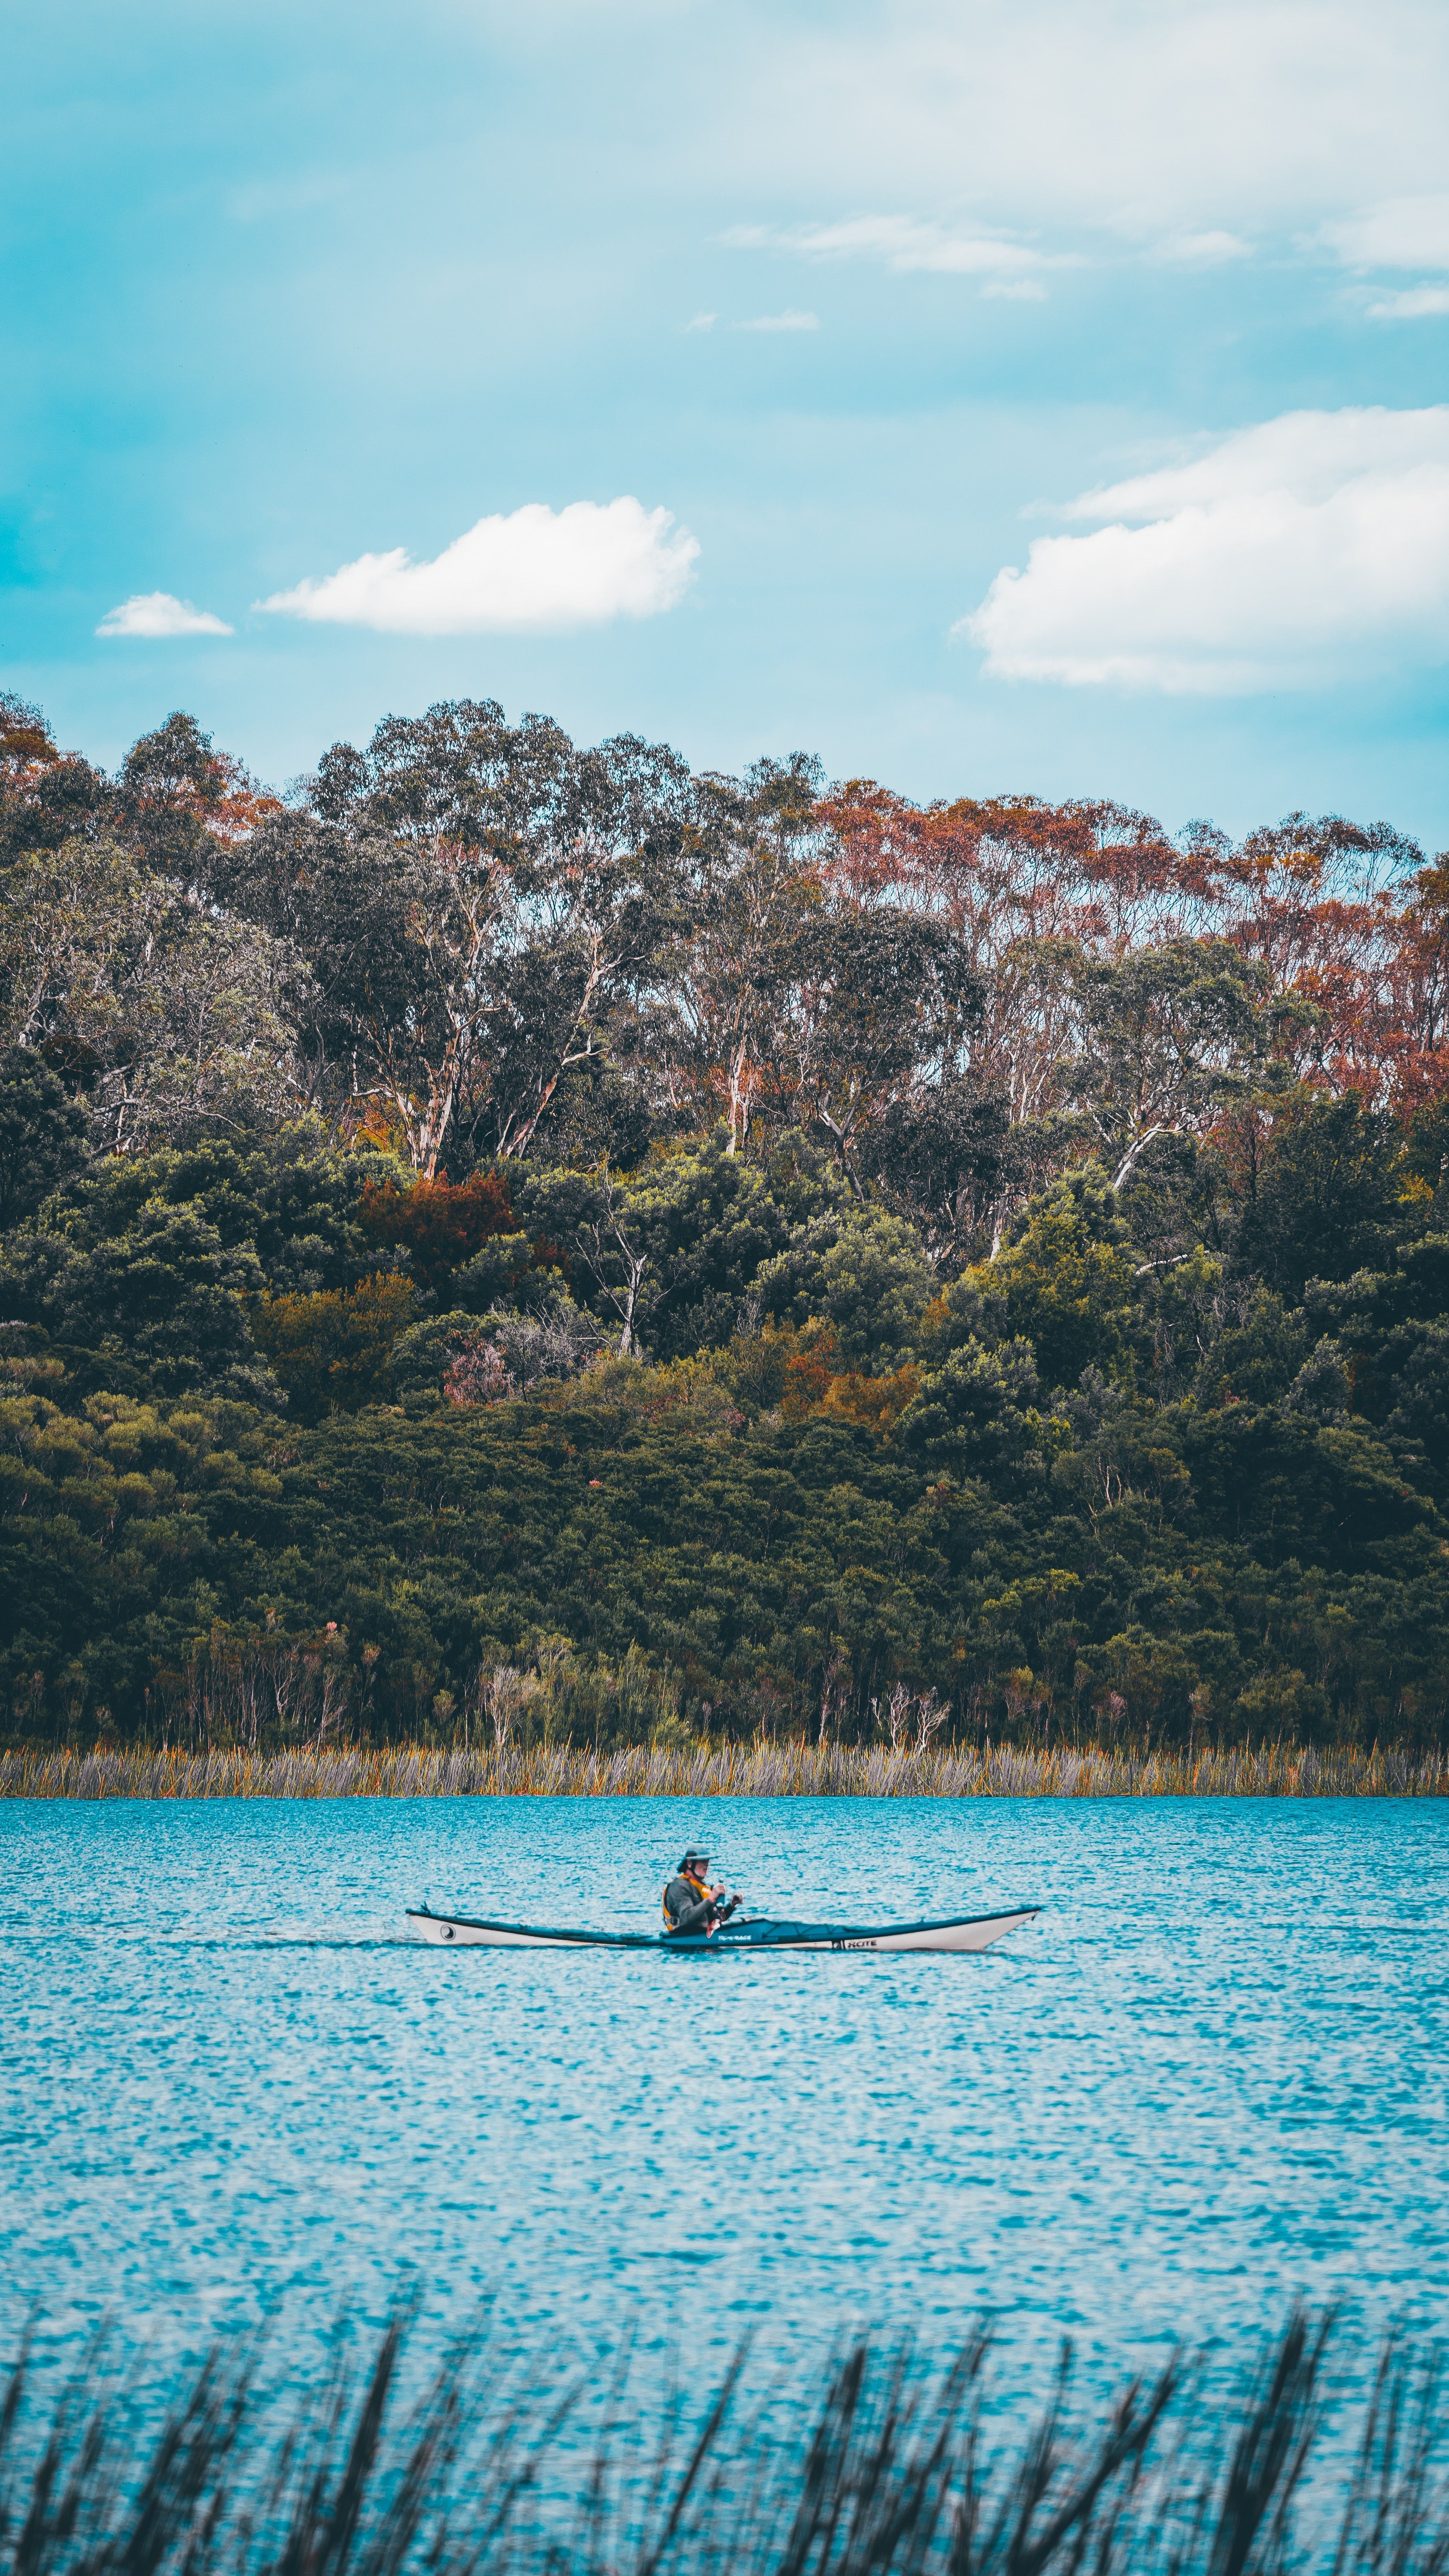 A person rowing a boat on a lake in Daylesford, Victoria, Australia